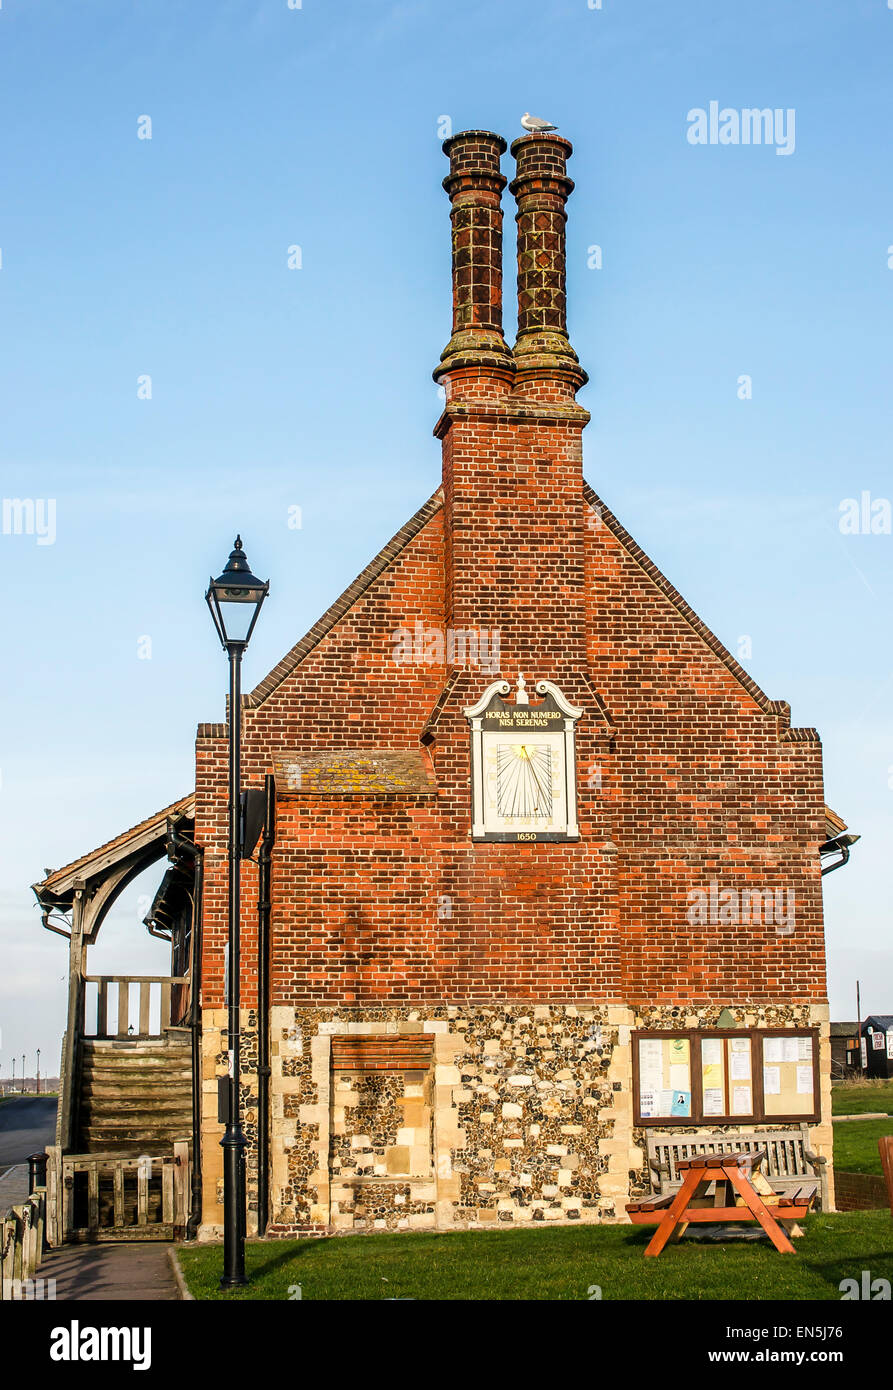 The red brick medieval Moot Hall in Aldeburgh, Suffolk, UK -- built in 1520. Stock Photo